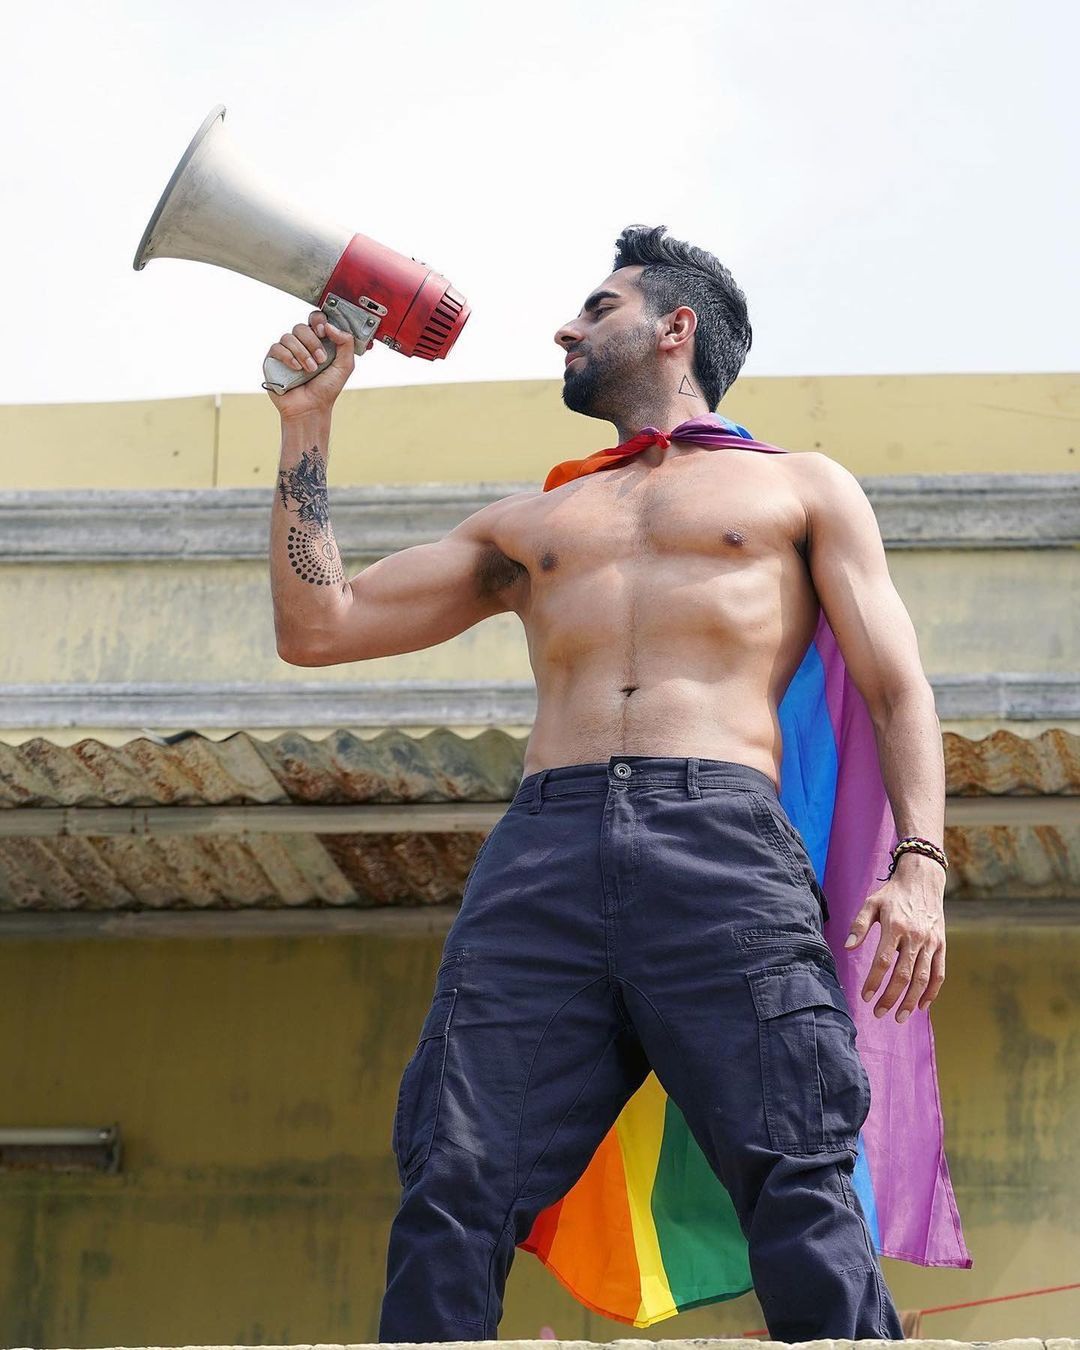 Ayushmann Khurrana looks sexy, wearing just his trousers and the Pride flag